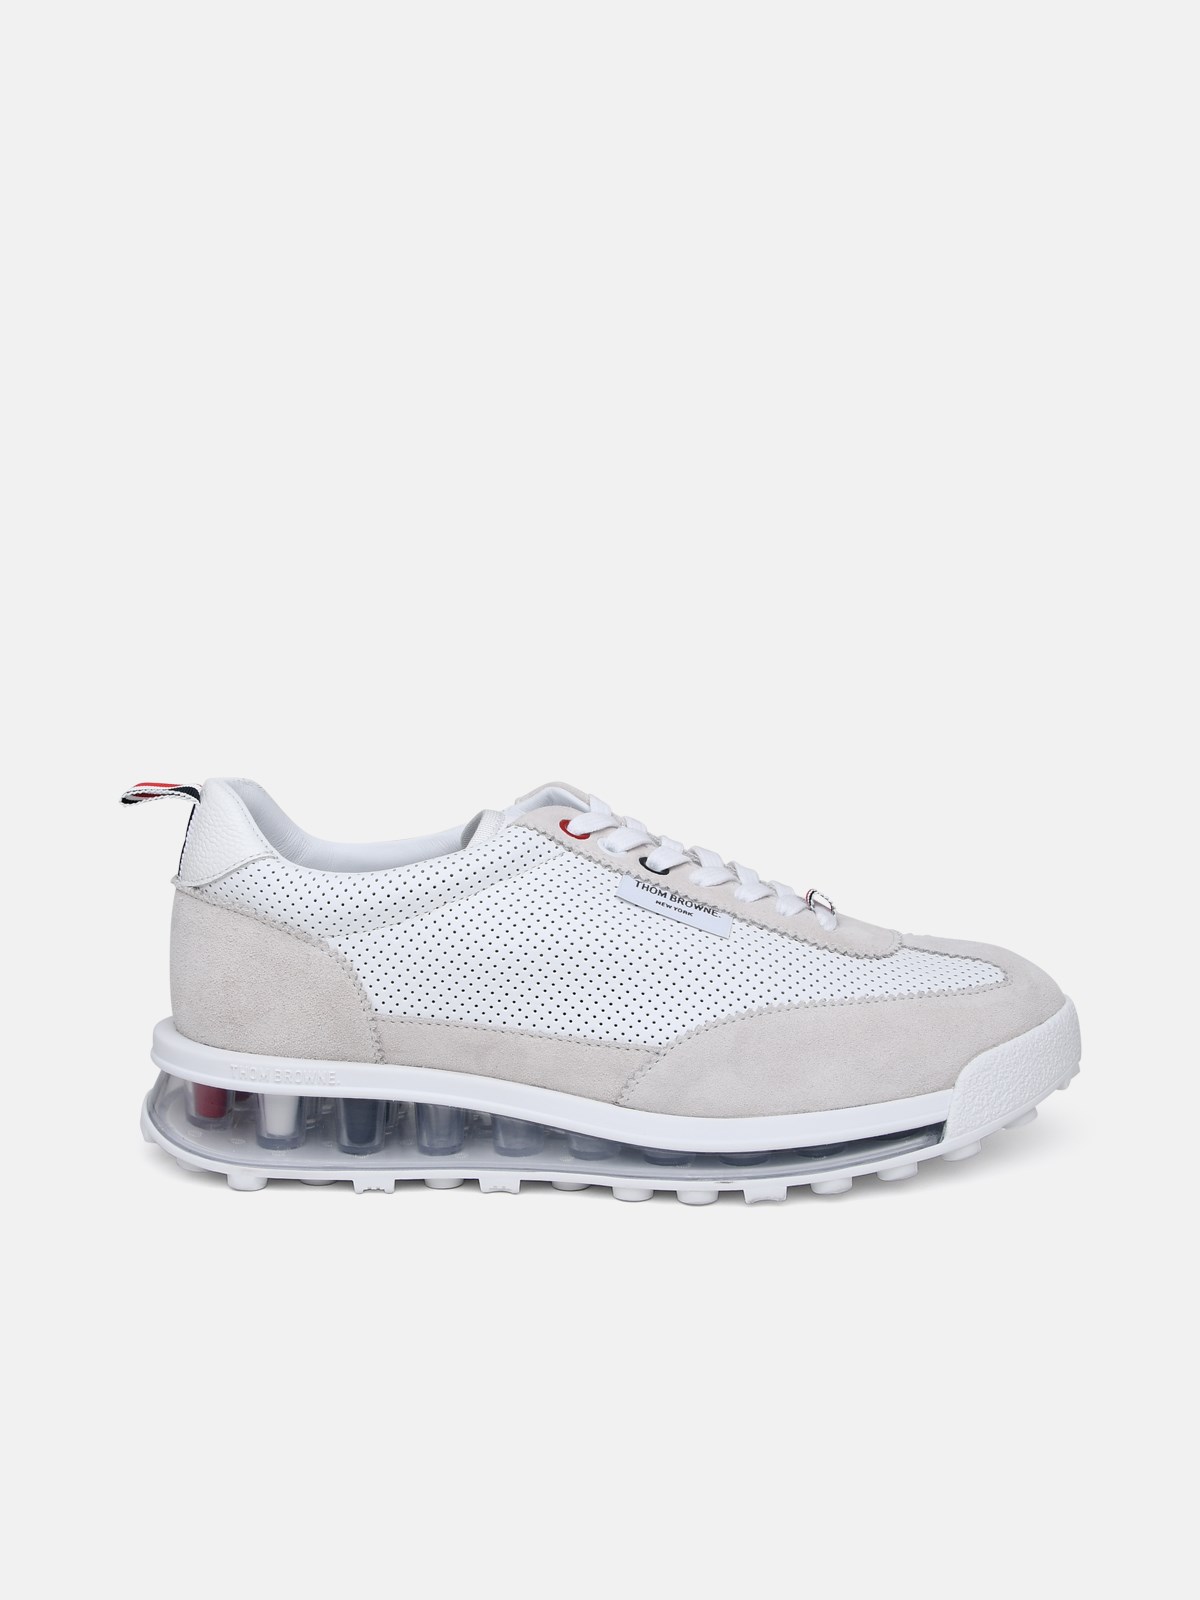 Thom Browne Tech Runner White Leather Sneakers